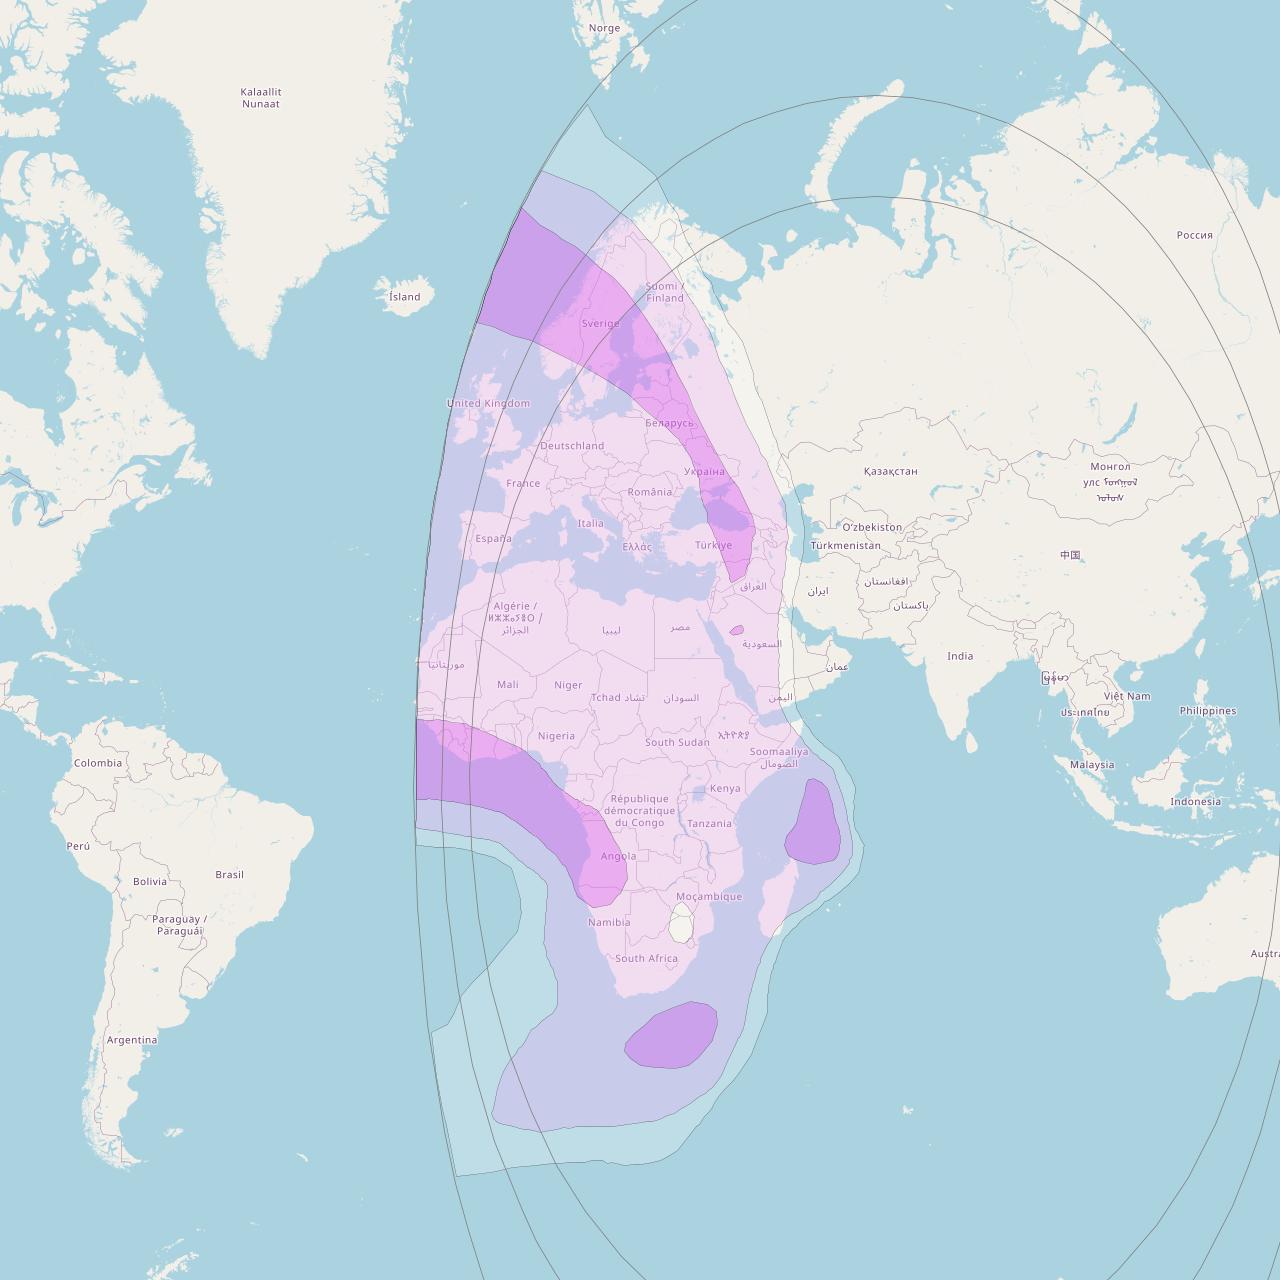 Intelsat 906 at 64° E downlink C-band West Hemi Beam coverage map